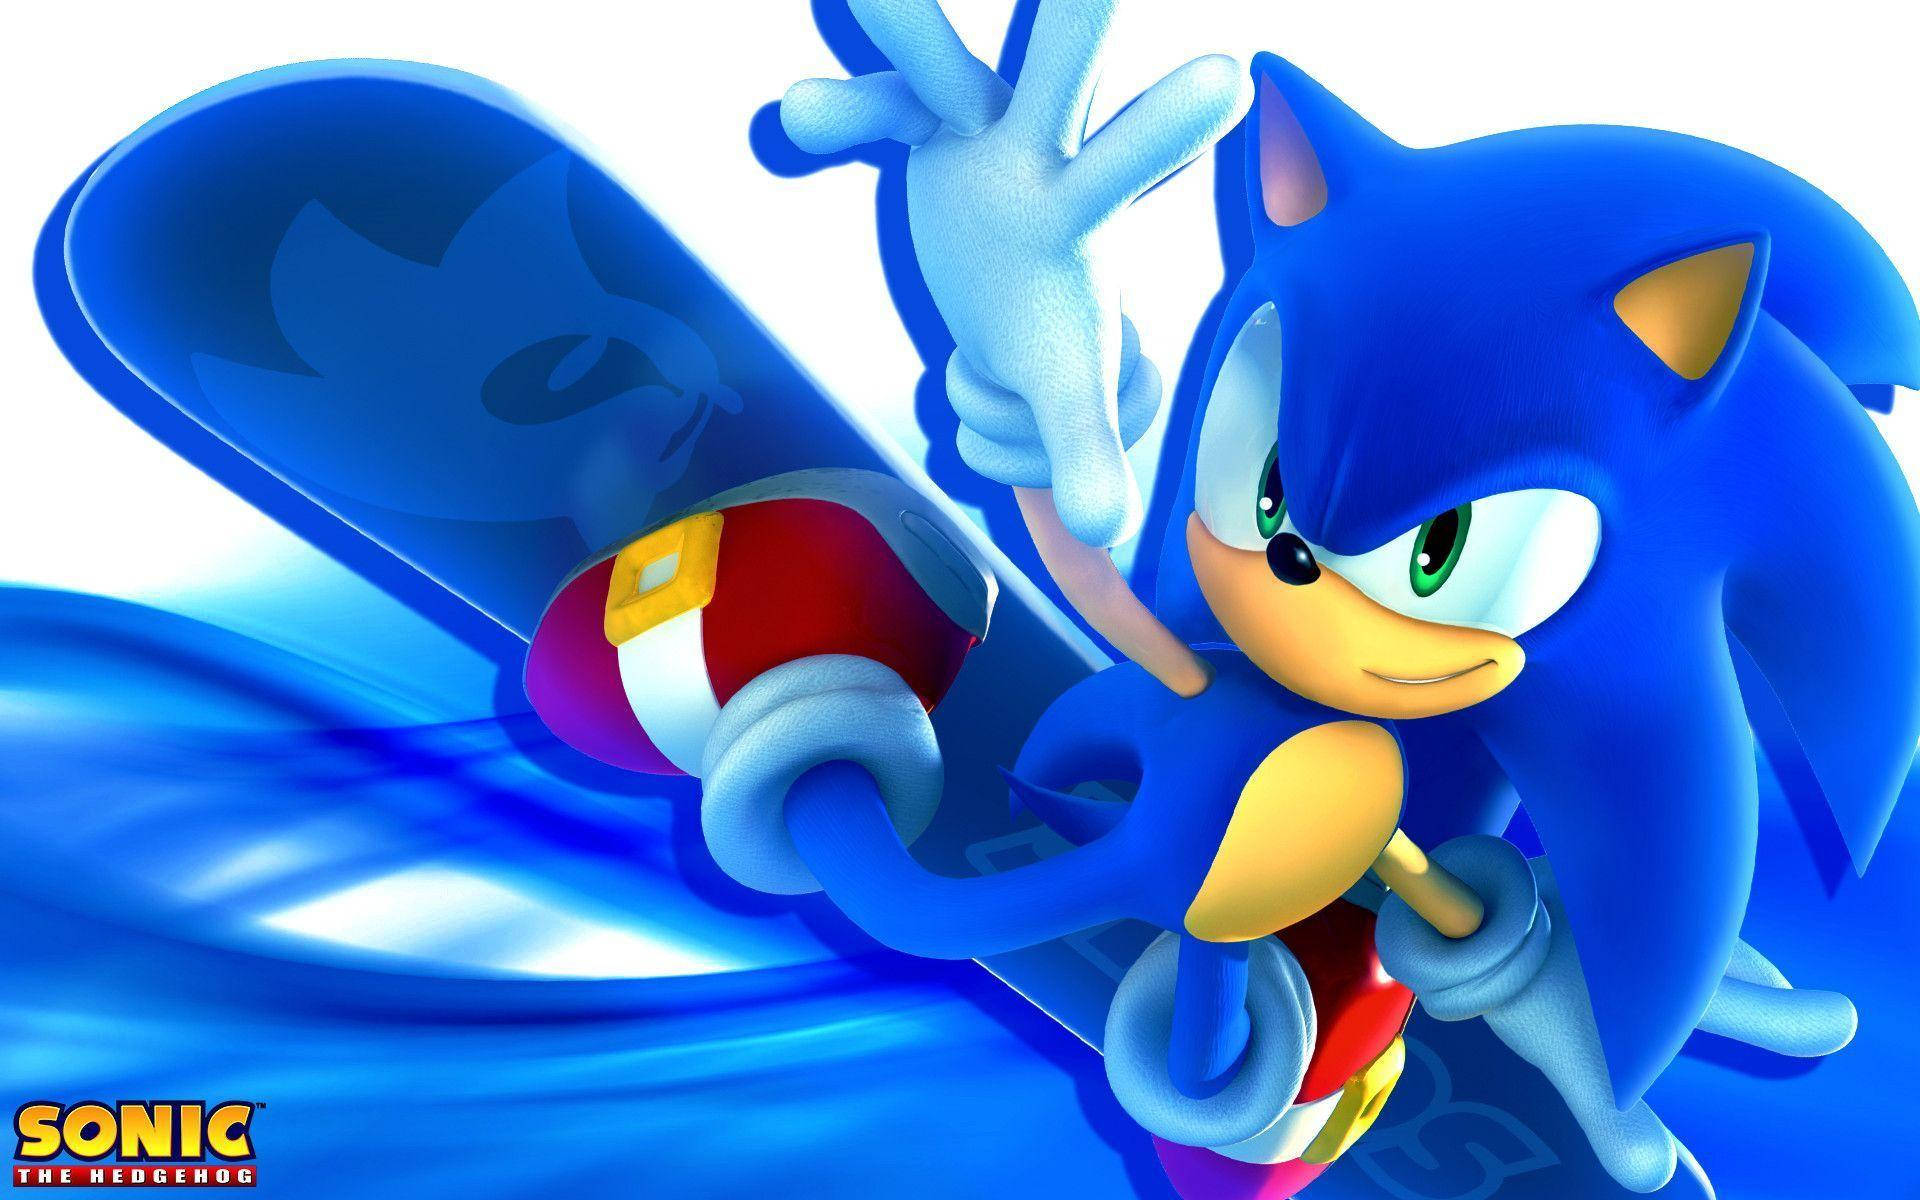 Sonic The Hedgehog Action Pose Wallpaper